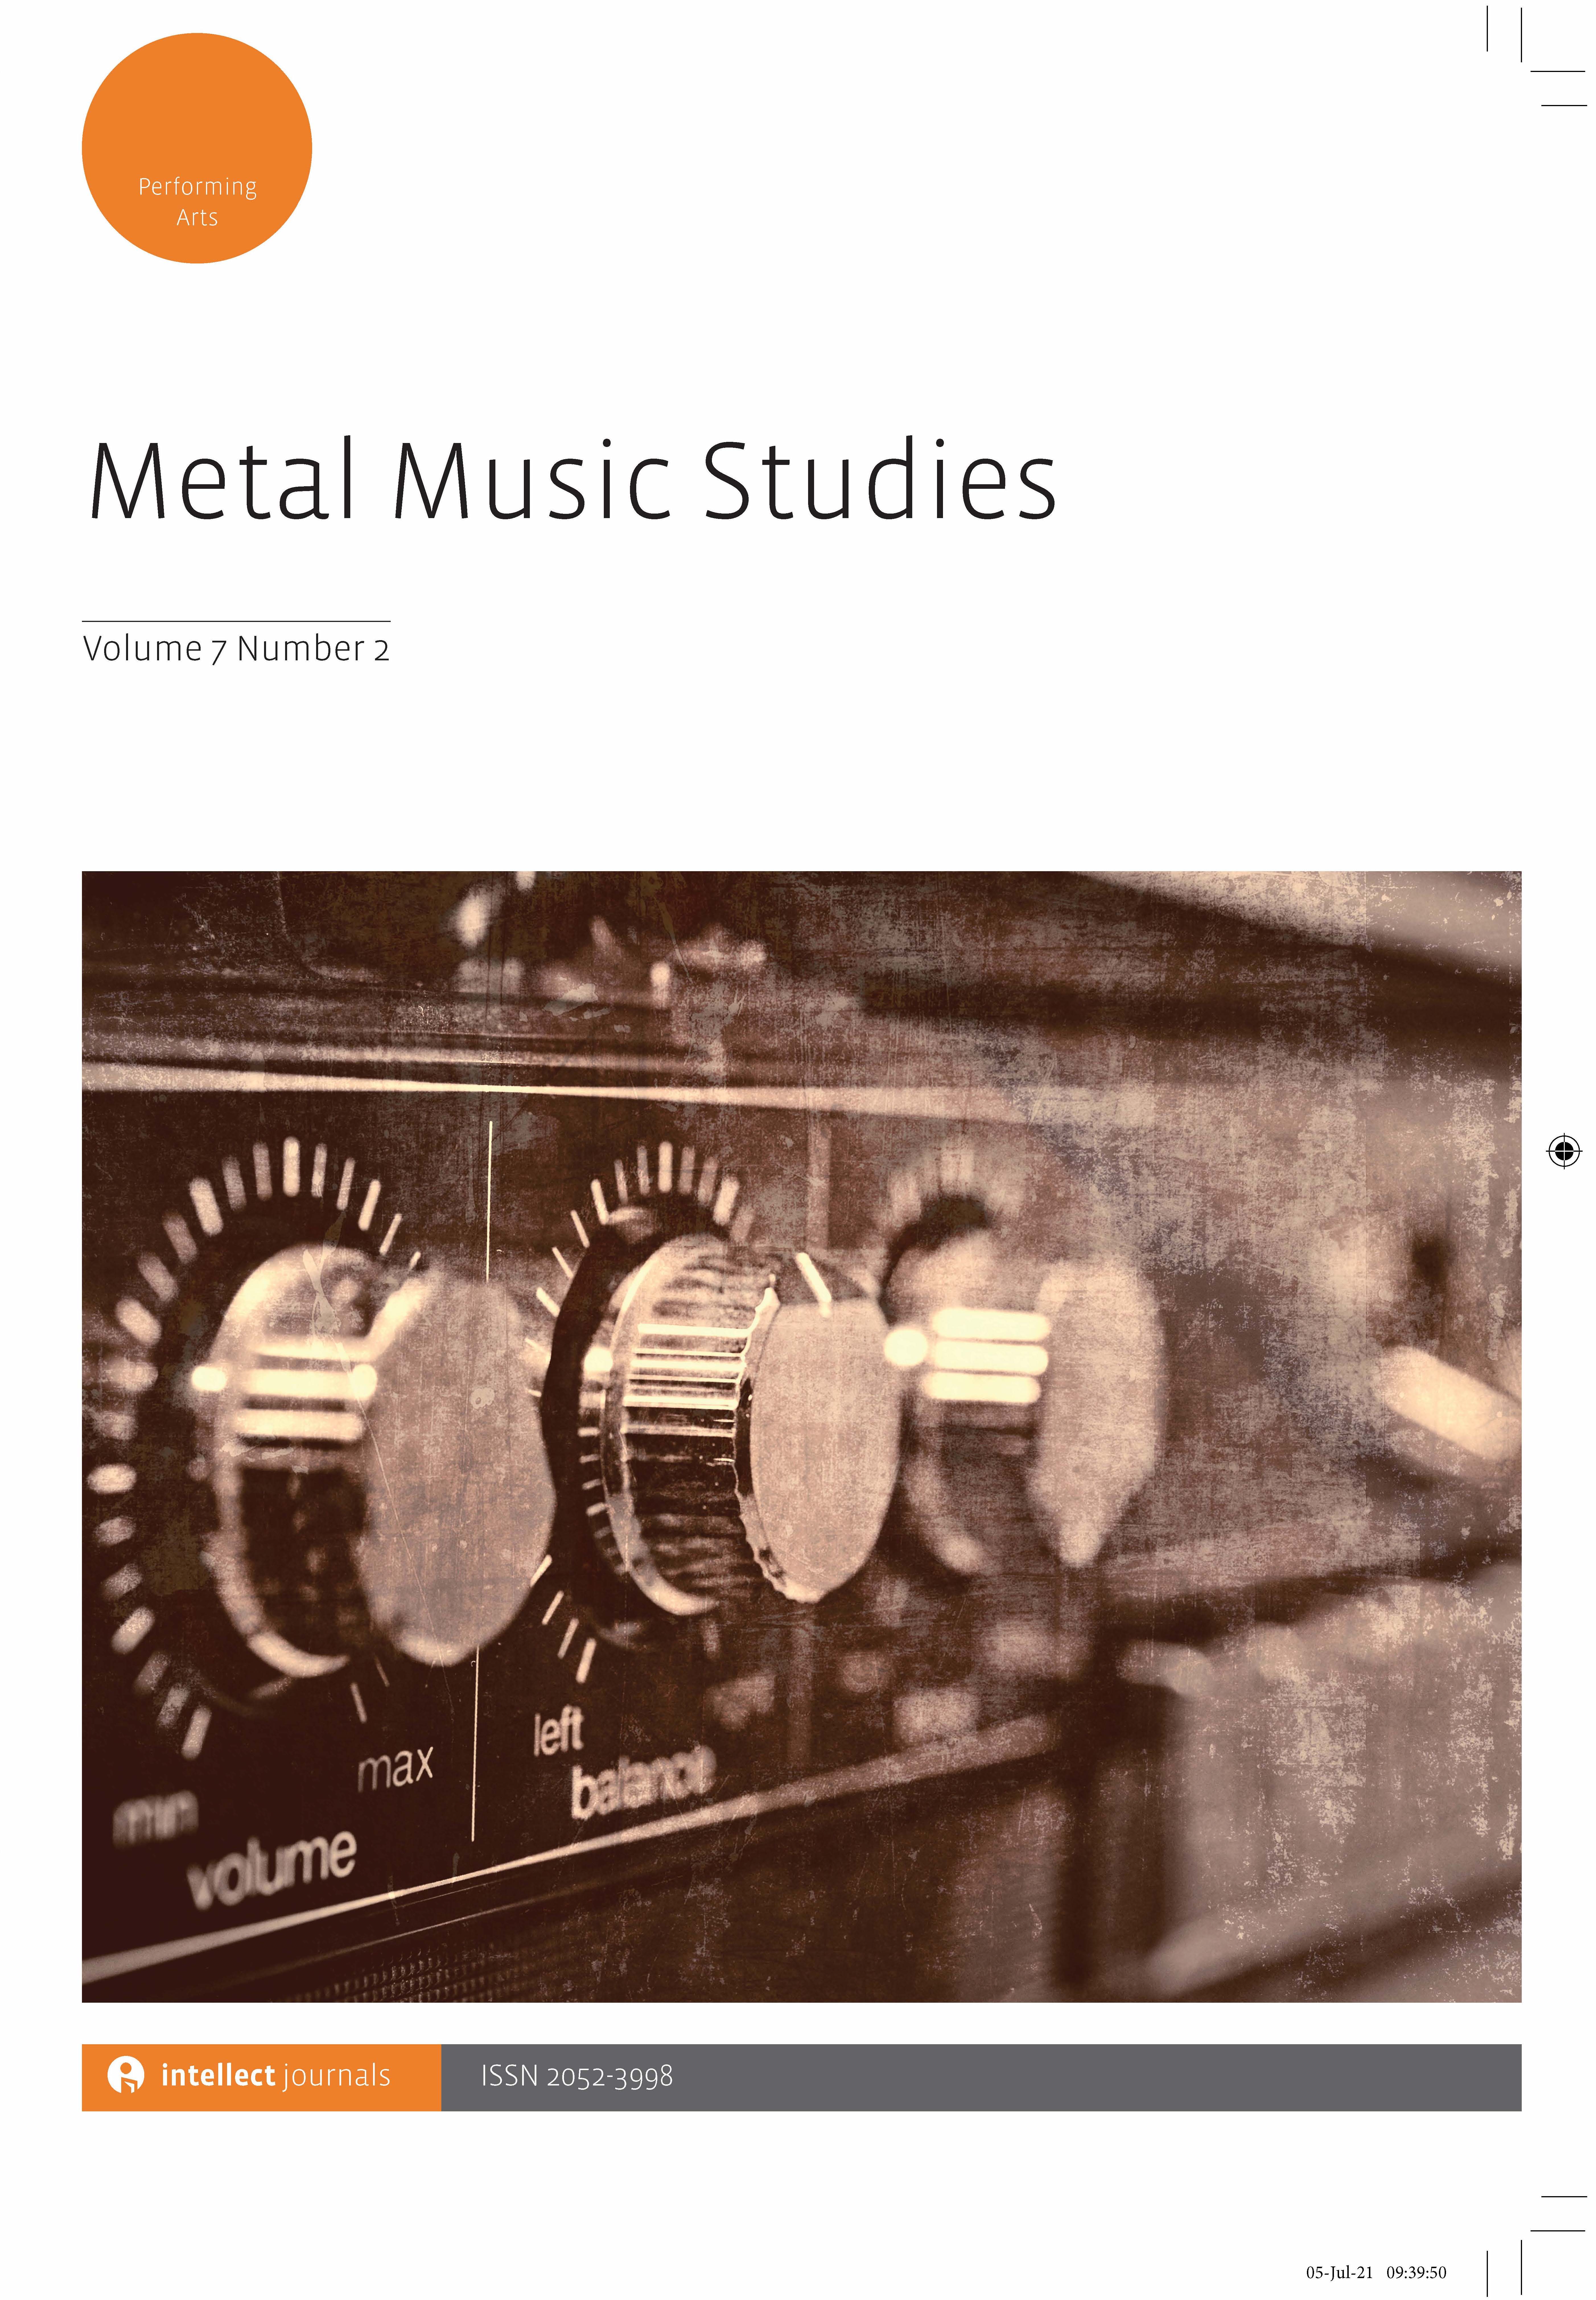 Metal Music Studies 7.2 is out now!